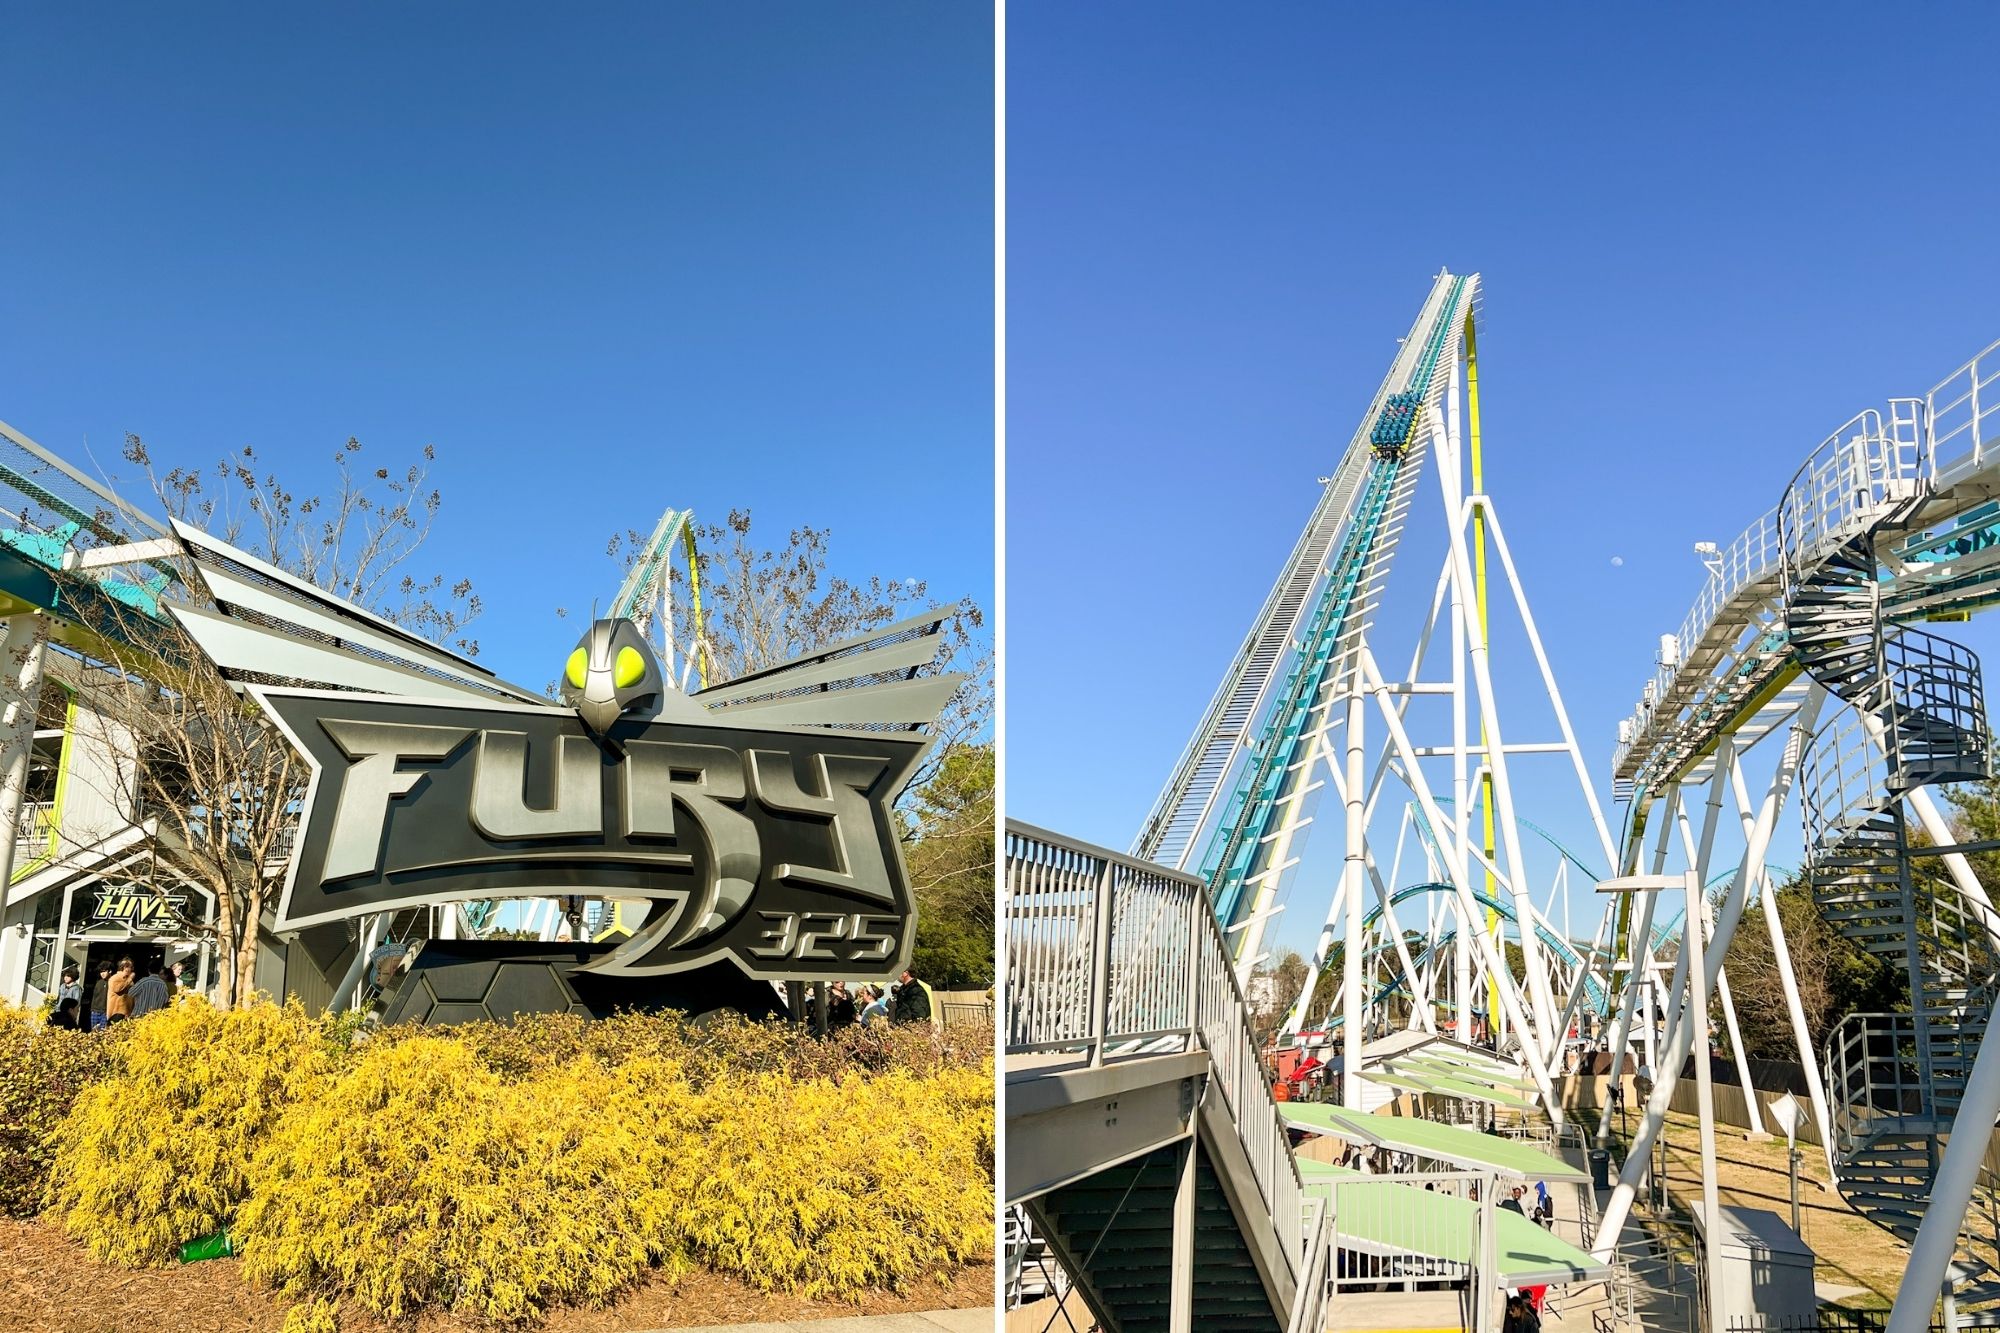 left: sign advertising the ride; right: view of the steep climb on the ride